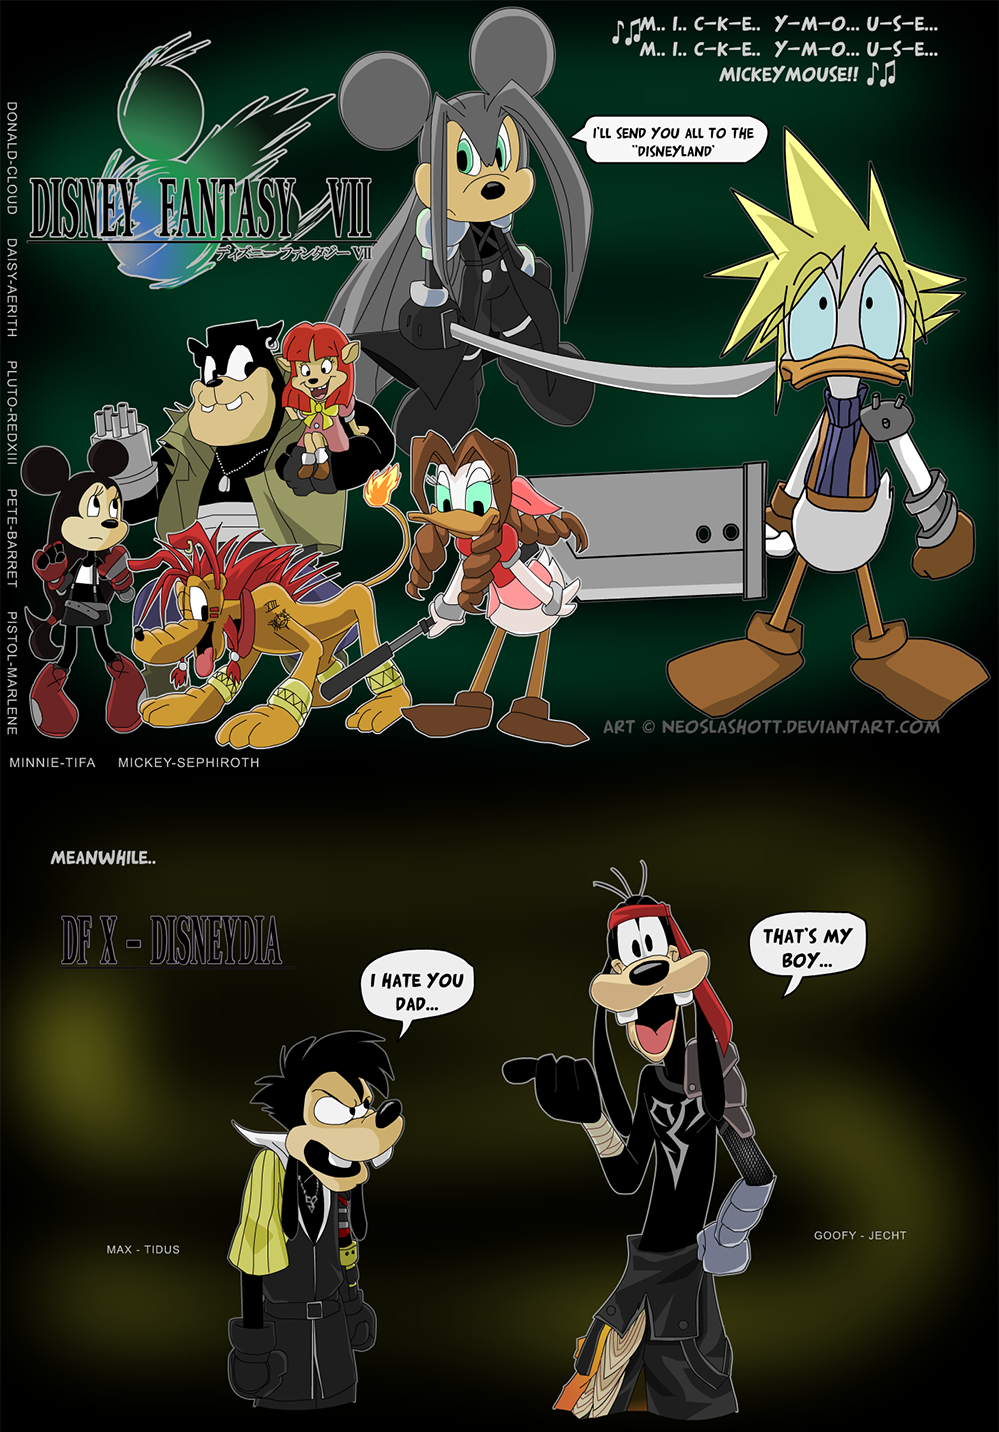 aerith_gainsborough_(cosplay) barret_wallace barret_wallace_(cosplay) cloud_strife cloud_strife_(cosplay) commentary cosplay crossover daisy_duck disney dissidia_final_fantasy donald_duck english father_and_daughter father_and_son final_fantasy final_fantasy_vii final_fantasy_x goof_troop goofy highres jecht jecht_(cosplay) marlene_wallace marlene_wallace_(cosplay) max_goof mickey_mouse minnie_mouse neoslashott no_humans parody pete pete_(disney) peter_pete pistol_pete pluto_(disney) red_xiii red_xiii_(cosplay) sephiroth sephiroth_(cosplay) tidus tidus_(cosplay) tifa_lockhart tifa_lockhart_(cosplay) watermark web_address